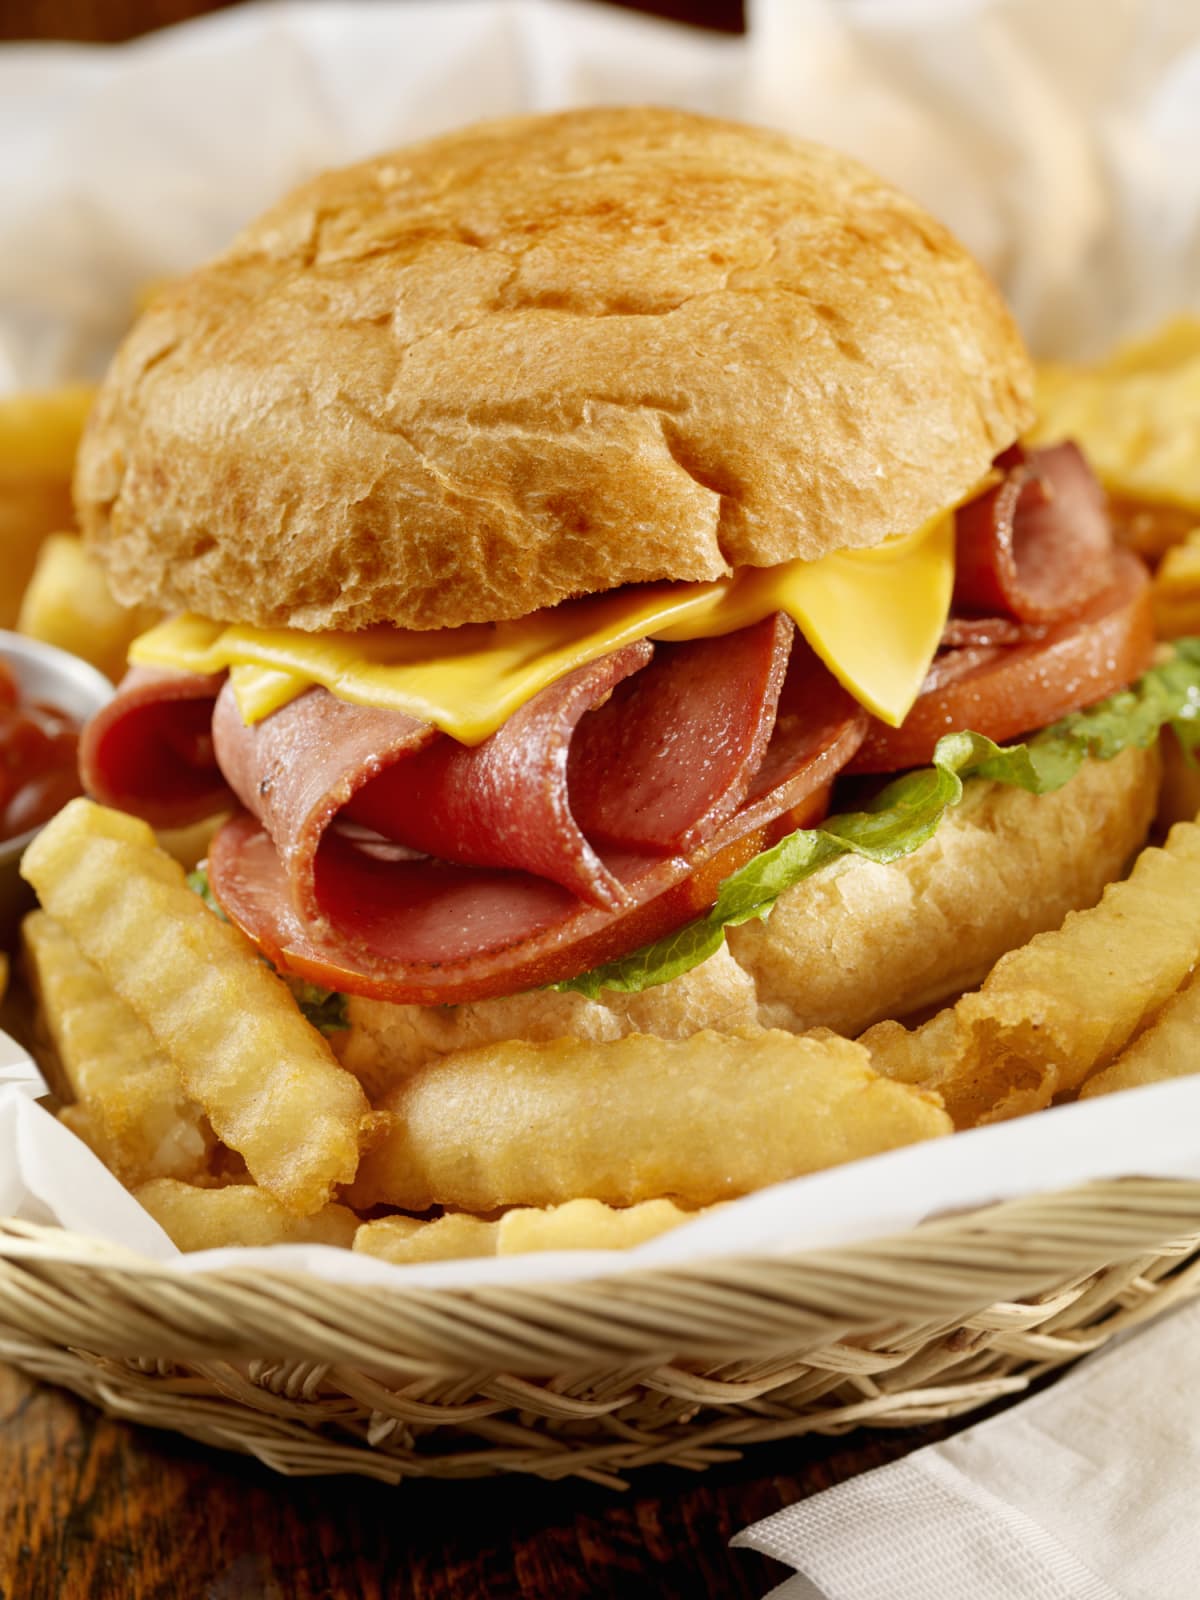 Fried Bologna Sandwich with Lettuce, Tomato, Melted Cheese and Fries-Photographed on Hasselblad H3D2-39mb Camera